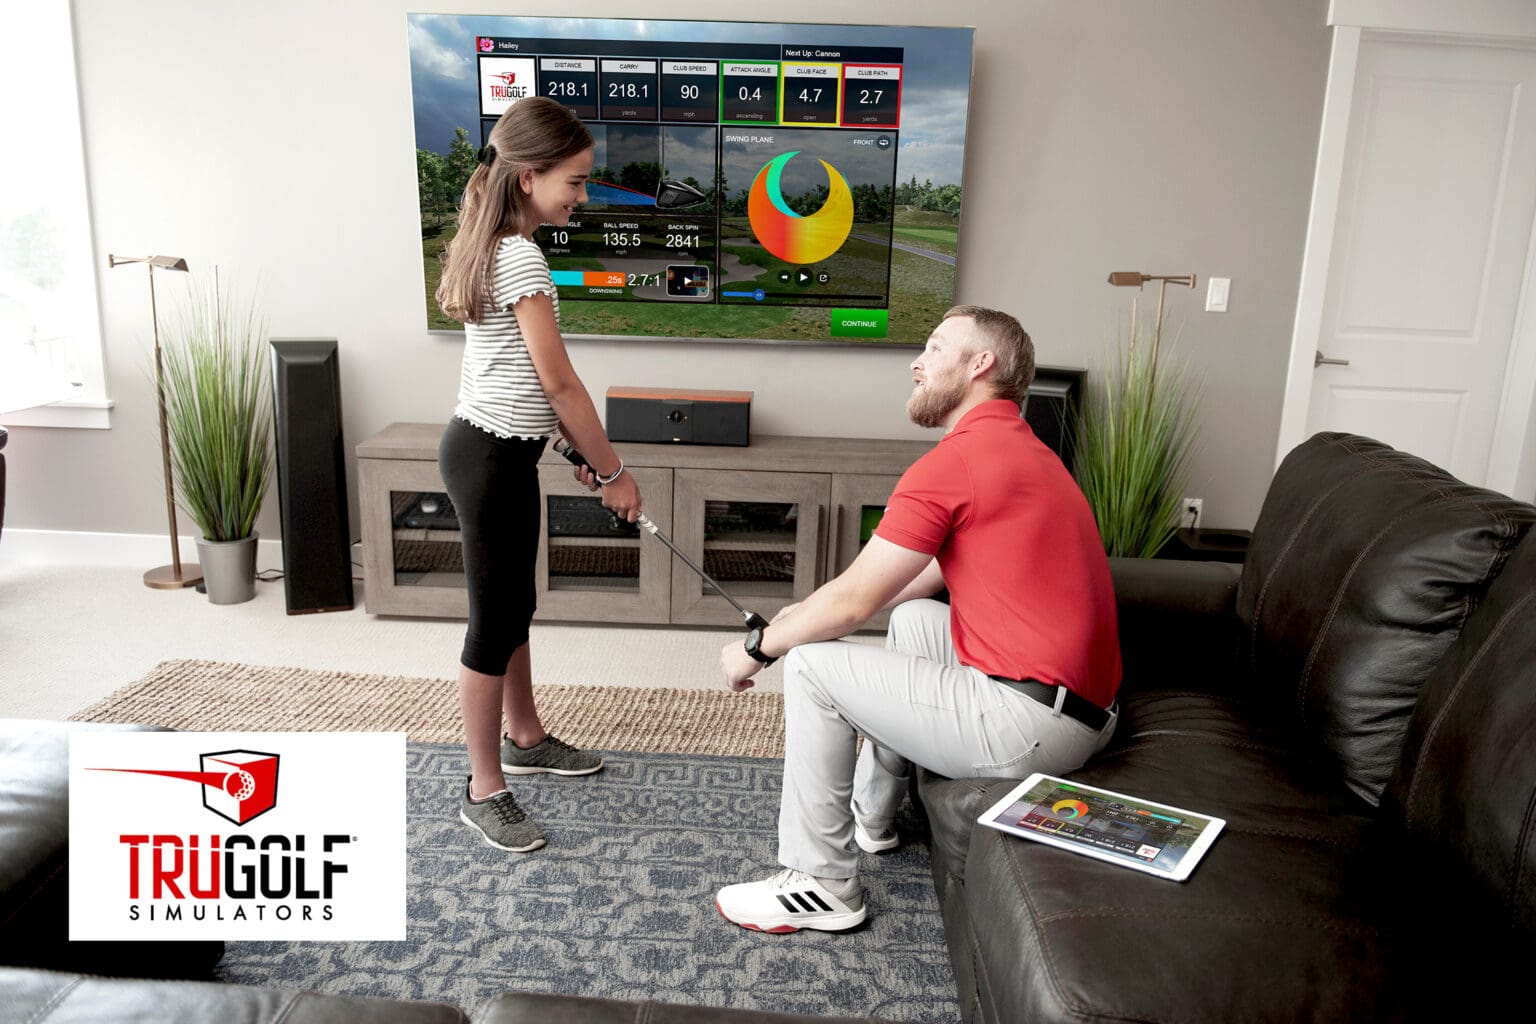 The TruGolf simulator will delight any golfer this holiday season, now only $173.